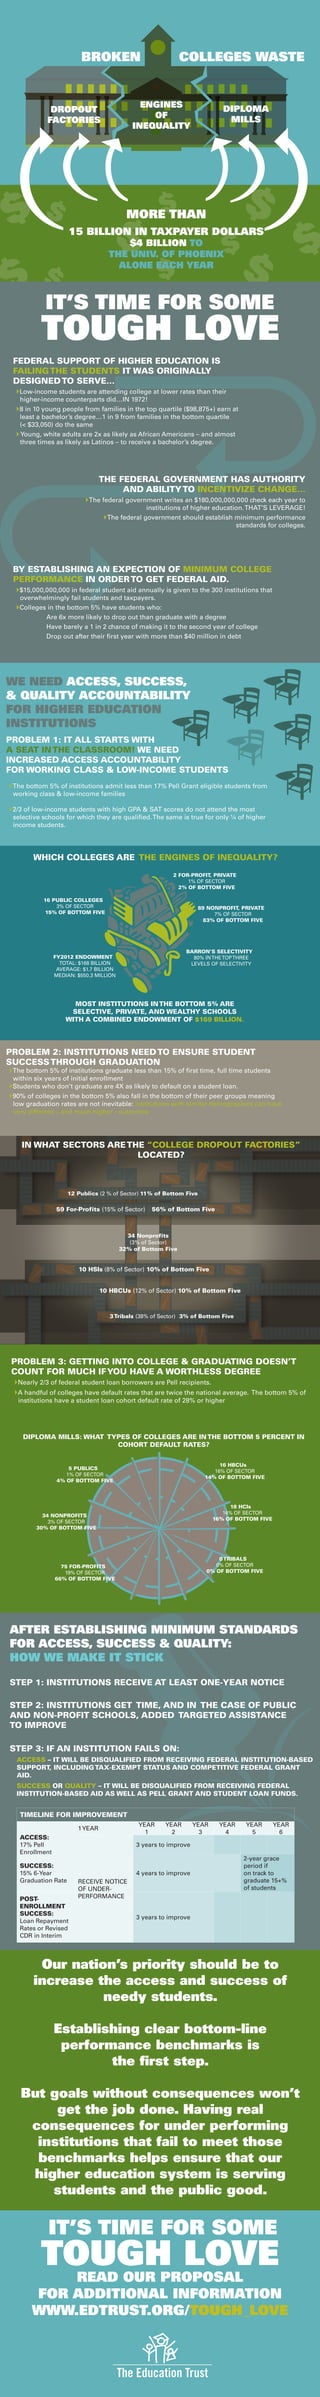 DIPLOMA MILLS: WHAT TYPES OF COLLEGES ARE INTHE BOTTOM 5 PERCENT IN
COHORT DEFAULT RATES?
DIPLOMA
MILLS
ENGINES
OF
INEQUALITY
DROPOUT
FACTORIES
BROKEN COLLEGES WASTE
IT’S TIME FOR SOME
TOUGH LOVE
IT’S TIME FOR SOME
Our nation’s priority should be to
increase the access and success of
needy students.
Establishing clear bottom-line
performance benchmarks is
the first step.
But goals without consequences won’t
get the job done. Having real
consequences for under performing
institutions that fail to meet those
benchmarks helps ensure that our
higher education system is serving
students and the public good.
TOUGH LOVEREAD OUR PROPOSAL
FOR ADDITIONAL INFORMATION
WWW.EDTRUST.ORG/TOUGH_LOVE
WE NEED ACCESS, SUCCESS,
& QUALITY ACCOUNTABILITY
FOR HIGHER EDUCATION
INSTITUTIONS
PROBLEM 1: IT ALL STARTS WITH
A SEAT INTHE CLASSROOM! WE NEED
INCREASED ACCESS ACCOUNTABILITY
FOR WORKING CLASS & LOW-INCOME STUDENTS
The bottom 5% of institutions admit less than 17% Pell Grant eligible students from
working class & low-income families
2/3 of low-income students with high GPA & SAT scores do not attend the most
selective schools for which they are qualified.The same is true for only ¼ of higher
income students.
AFTER ESTABLISHING MINIMUM STANDARDS
FOR ACCESS, SUCCESS & QUALITY:
HOW WE MAKE IT STICK
STEP 1: INSTITUTIONS RECEIVE AT LEAST ONE-YEAR NOTICE
STEP 2: INSTITUTIONS GET TIME, AND IN THE CASE OF PUBLIC
AND NON-PROFIT SCHOOLS, ADDED TARGETED ASSISTANCE
TO IMPROVE
STEP 3: IF AN INSTITUTION FAILS ON:
ACCESS – IT WILL BE DISQUALIFIED FROM RECEIVING FEDERAL INSTITUTION-BASED
SUPPORT, INCLUDINGTAX-EXEMPT STATUS AND COMPETITIVE FEDERAL GRANT
AID.
SUCCESS OR QUALITY – IT WILL BE DISQUALIFIED FROM RECEIVING FEDERAL
INSTITUTION-BASED AID AS WELL AS PELL GRANT AND STUDENT LOAN FUNDS.
PROBLEM 2: INSTITUTIONS NEEDTO ENSURE STUDENT
SUCCESSTHROUGH GRADUATION
The bottom 5% of institutions graduate less than 15% of first time, full time students
within six years of initial enrollment
Students who don’t graduate are 4X as likely to default on a student loan.
90% of colleges in the bottom 5% also fall in the bottom of their peer groups meaning
low graduation rates are not inevitable: institutions with similar demographics can have
very different – and much higher - outcomes
PROBLEM 3: GETTING INTO COLLEGE & GRADUATING DOESN’T
COUNT FOR MUCH IFYOU HAVE A WORTHLESS DEGREE
Nearly 2/3 of federal student loan borrowers are Pell recipients.
A handful of colleges have default rates that are twice the national average. The bottom 5% of
institutions have a student loan cohort default rate of 28% or higher
FEDERAL SUPPORT OF HIGHER EDUCATION IS
FAILINGTHE STUDENTS IT WAS ORIGINALLY
DESIGNEDTO SERVE…
Low-income students are attending college at lower rates than their
higher-income counterparts did…IN 1972!
8 in 10 young people from families in the top quartile ($98,875+) earn at
least a bachelor’s degree…1 in 9 from families in the bottom quartile
(< $33,050) do the same
Young, white adults are 2x as likely as African Americans – and almost
three times as likely as Latinos – to receive a bachelor’s degree.
BY ESTABLISHING AN EXPECTION OF MINIMUM COLLEGE
PERFORMANCE IN ORDERTO GET FEDERAL AID.
$15,000,000,000 in federal student aid annually is given to the 300 institutions that
overwhelmingly fail students and taxpayers.
Colleges in the bottom 5% have students who:
Are 6x more likely to drop out than graduate with a degree
Have barely a 1 in 2 chance of making it to the second year of college
Drop out after their first year with more than $40 million in debt
THE FEDERAL GOVERNMENT HAS AUTHORITY
AND ABILITYTO INCENTIVIZE CHANGE…
The federal government writes an $180,000,000,000 check each year to
institutions of higher education.THAT’S LEVERAGE!
The federal government should establish minimum performance
standards for colleges.
MOST INSTITUTIONS INTHE BOTTOM 5% ARE
SELECTIVE, PRIVATE, AND WEALTHY SCHOOLS
WITH A COMBINED ENDOWMENT OF $169 BILLION.
16 PUBLIC COLLEGES
3% OF SECTOR
15% OF BOTTOM FIVE
89 NONPROFIT, PRIVATE
7% OF SECTOR
83% OF BOTTOM FIVE
2 FOR-PROFIT, PRIVATE
1% OF SECTOR
2% OF BOTTOM FIVE
BARRON’S SELECTIVITY
80% INTHETOPTHREE
LEVELS OF SELECTIVITY
FY2012 ENDOWMENT
TOTAL: $168 BILLION
AVERAGE: $1.7 BILLION
MEDIAN: $550.3 MILLION
WHICH COLLEGES ARE THE ENGINES OF INEQUALITY?
12 Publics (2 % of Sector) 11% of Bottom Five
34 Nonprofits
(3% of Sector)
32% of Bottom Five
10 HSIs (8% of Sector) 10% of Bottom Five
3Tribals (38% of Sector) 3% of Bottom Five
59 For-Profits (15% of Sector) 56% of Bottom Five
10 HBCUs (12% of Sector) 10% of Bottom Five
IN WHAT SECTORS ARETHE “COLLEGE DROPOUT FACTORIES”
LOCATED?
TIMELINE FOR IMPROVEMENT
1YEAR
YEAR
1
YEAR
2
YEAR
3
YEAR
4
YEAR
5
YEAR
6
ACCESS:
17% Pell
Enrollment
RECEIVE NOTICE
OF UNDER-
PERFORMANCE
3 years to improve
SUCCESS:
15% 6-Year
Graduation Rate
4 years to improve
2-year grace
period if
on track to
graduate 15+%
of students
POST-
ENROLLMENT
SUCCESS:
Loan Repayment
Rates or Revised
CDR in Interim
3 years to improve
5 PUBLICS
1% OF SECTOR
4% OF BOTTOM FIVE
34 NONPROFITS
3% OF SECTOR
30% OF BOTTOM FIVE
75 FOR-PROFITS
19% OF SECTOR
66% OF BOTTOM FIVE
16 HBCUs
16% OF SECTOR
14% OF BOTTOM FIVE
18 HCIs
14% OF SECTOR
16% OF BOTTOM FIVE
0TRIBALS
0% OF SECTOR
0% OF BOTTOM FIVE
MORE THAN
15 BILLION IN TAXPAYER DOLLARS
$4 BILLION TO
THE UNIV. OF PHOENIX
ALONE EACH YEAR
 